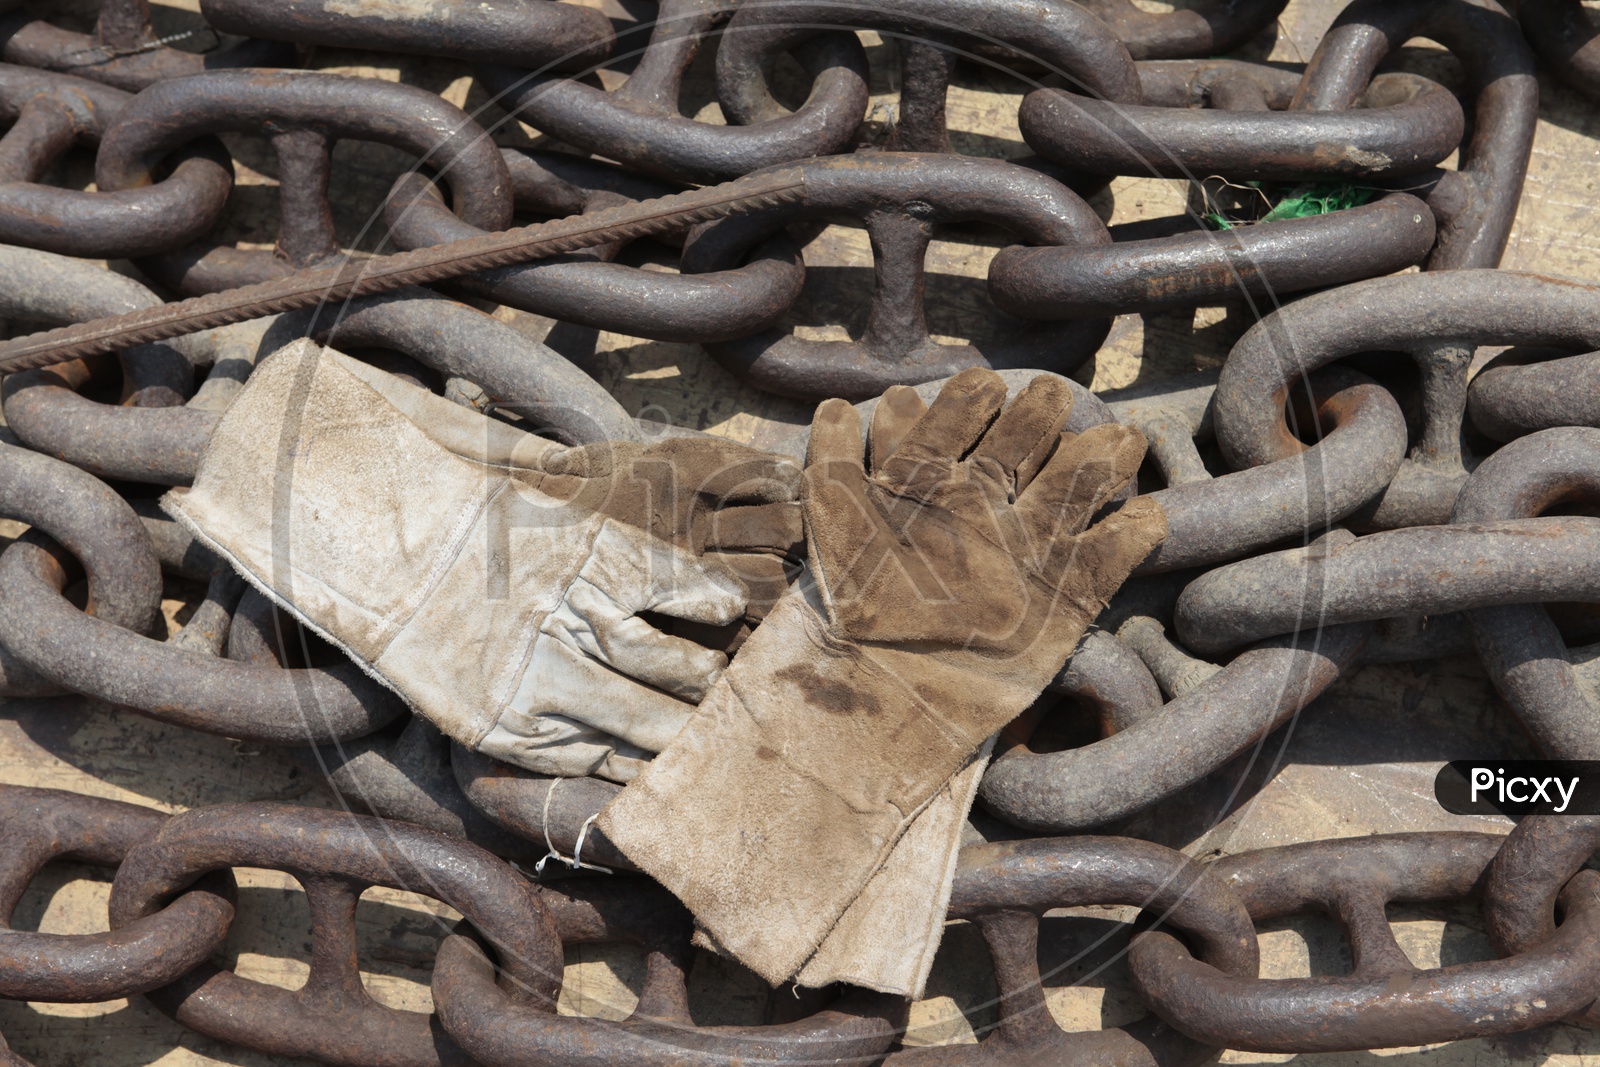 Safety Hand Gloves on the chain in a ship